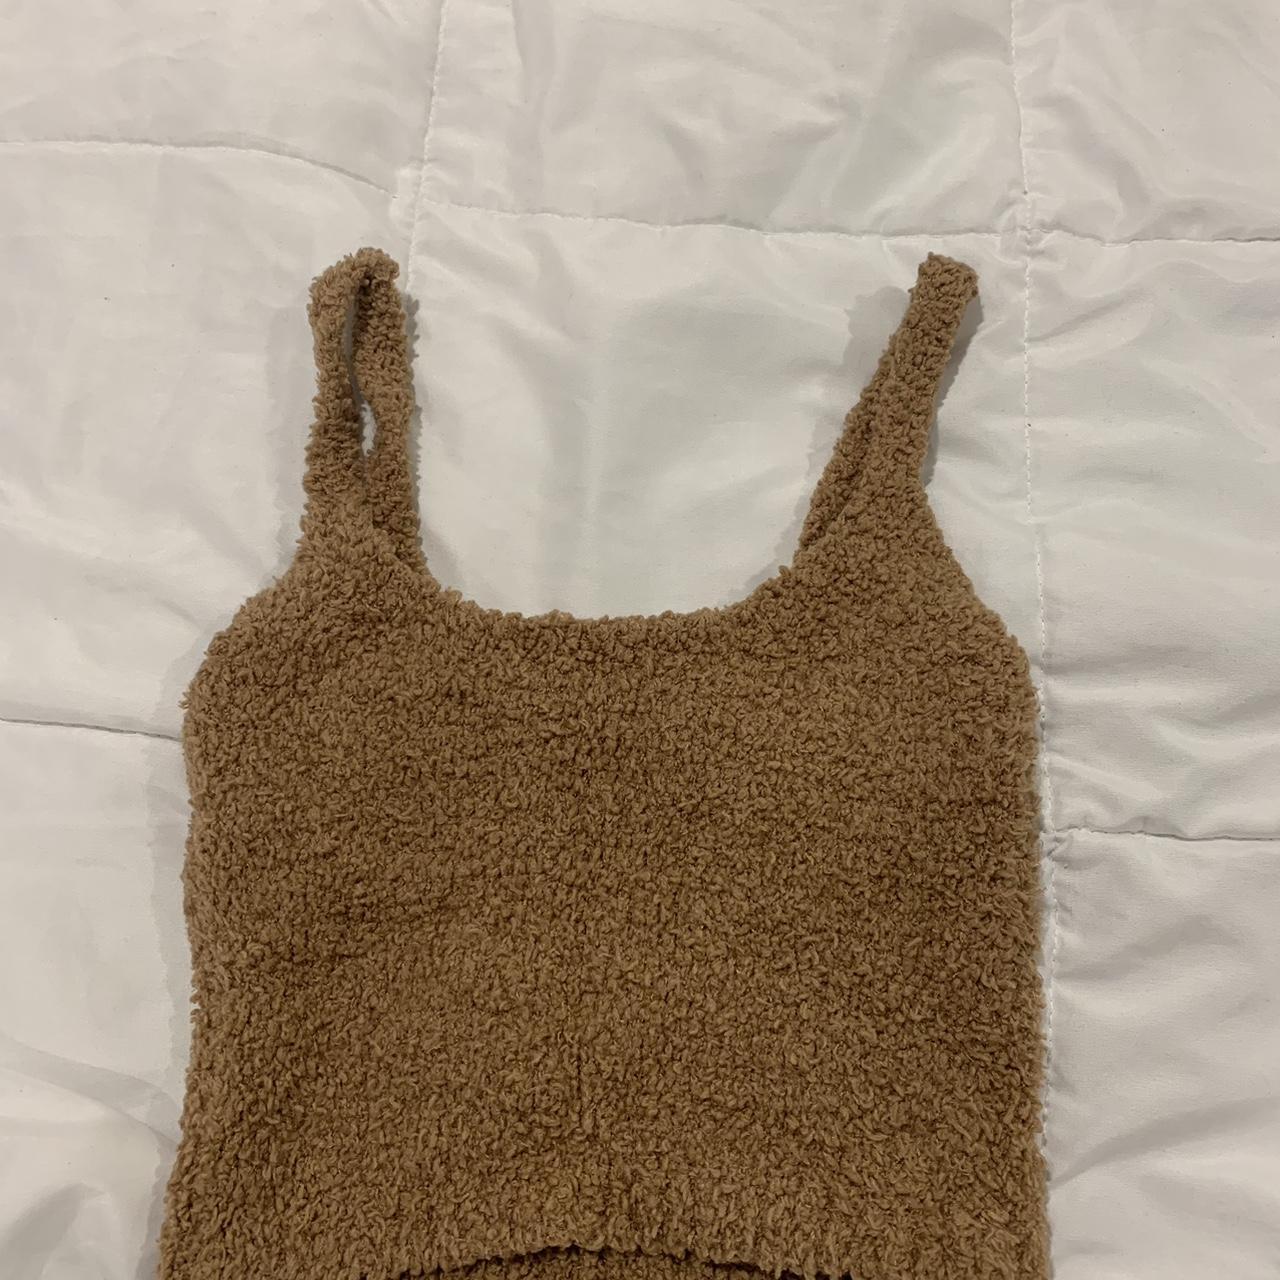 SKIMS COZY COLLECTION COZY KNIT TANK IN CAMEL SIZE XXS/XS – The